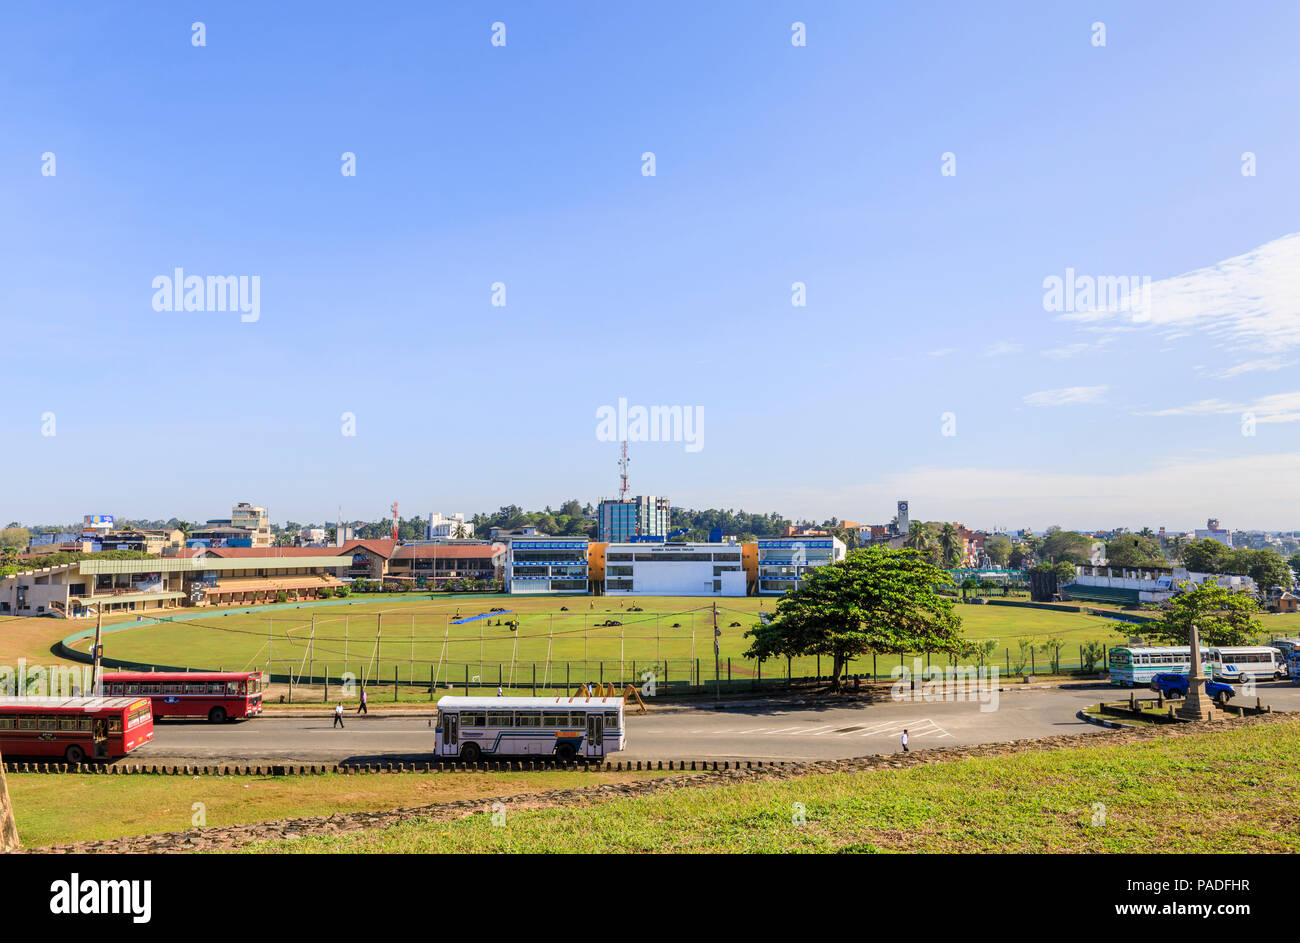 Panoramic view of the famous Galle cricket ground (Galle International Stadium) from Galle Fort, Galle, Southern Province, Sri Lanka Stock Photo